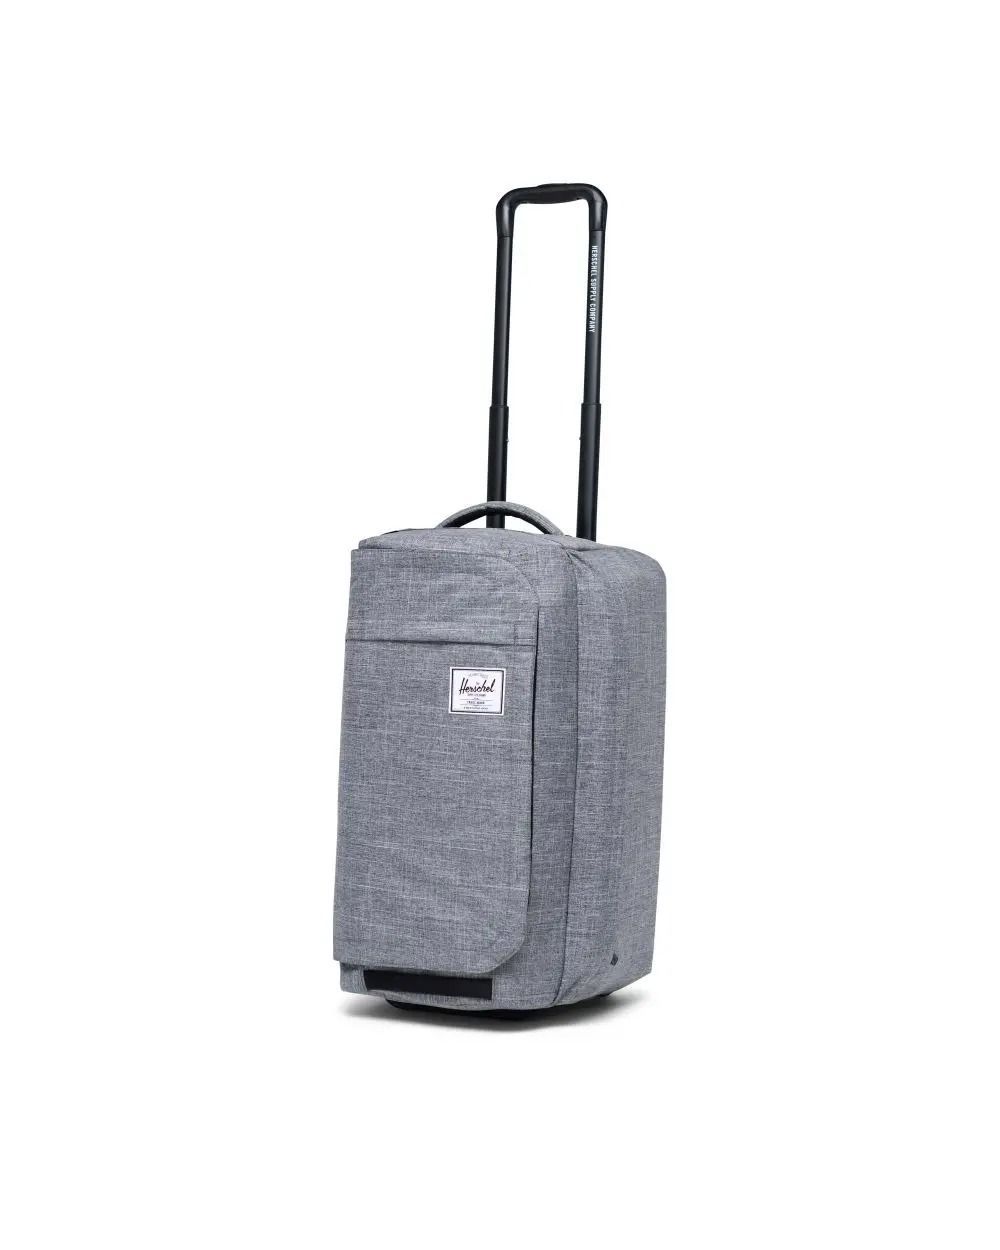 <p><strong>$230.00</strong></p><p>As <em><a href="https://www.esquire.com/style/mens-accessories/g26293128/best-luggage-suitcase-brands/#product-6bcfae03-534f-4edf-98ef-f98b206a4f6d">Esquire</a></em> points out, many of us probably already own—and love—a Herschel backpack. The aesthetic carries over to the brand's complete line of luggage. Sporty, hip design cues blended with quality materials and construction make for fantastic suitcases, duffle bags, and more.</p><p>The <strong>50L Outfitter Wheelie Duffel</strong> features the same casual-but-classy aesthetic as Herschel's ubiquitous backpacks but in carry-on roller-luggage form, with a retractable two-stage locking trolley handle, zippered U-shaped closure, and top and side carrying handles. It's also <a href="https://go.redirectingat.com?id=74968X1553576&url=https%3A%2F%2Fherschel.com%2Fshop%2Fsoft-shells%2Foutfitter-wheelie-70l%3FshowSales%3D0%26v%3D10866-00919-OS&sref=https%3A%2F%2Fwww.roadandtrack.com%2Fgear%2Flifestyle%2Fg44130437%2Fbest-luggage-brands%2F">available in a 70L size</a> for long trips. </p><a class="body-btn-link" href="https://www.amazon.com/stores/Herschel/Herschel/page/2CC64917-1E51-42E3-A896-3DD6F3A70E91?tag=syndication-20&ascsubtag=%5Bartid%7C10064.g.44130437%5Bsrc%7Cmsn-us">Shop Herschel at Amazon</a>